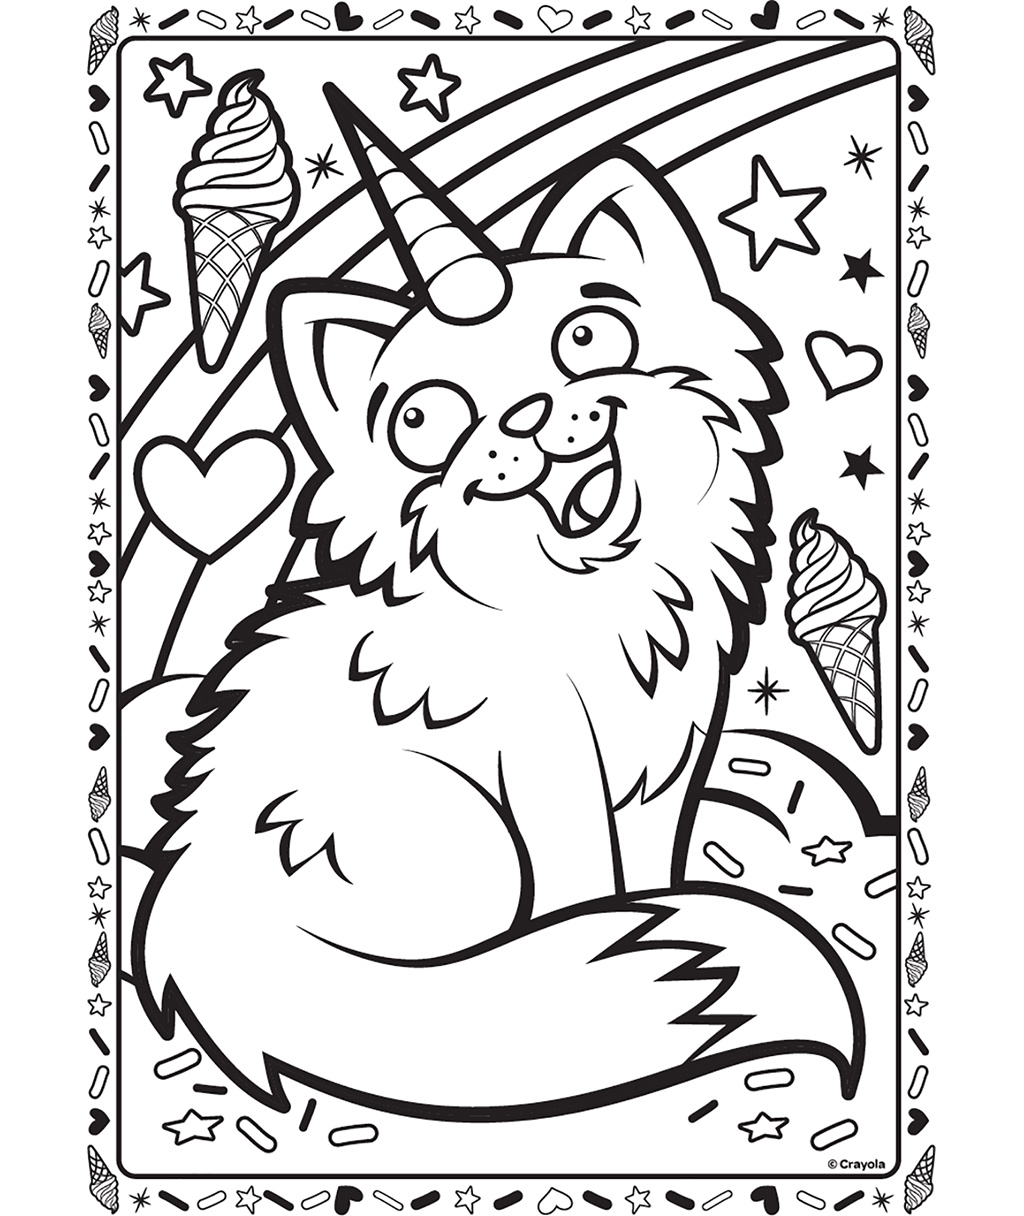 Unikitty Coloring Pages at GetDrawings | Free download